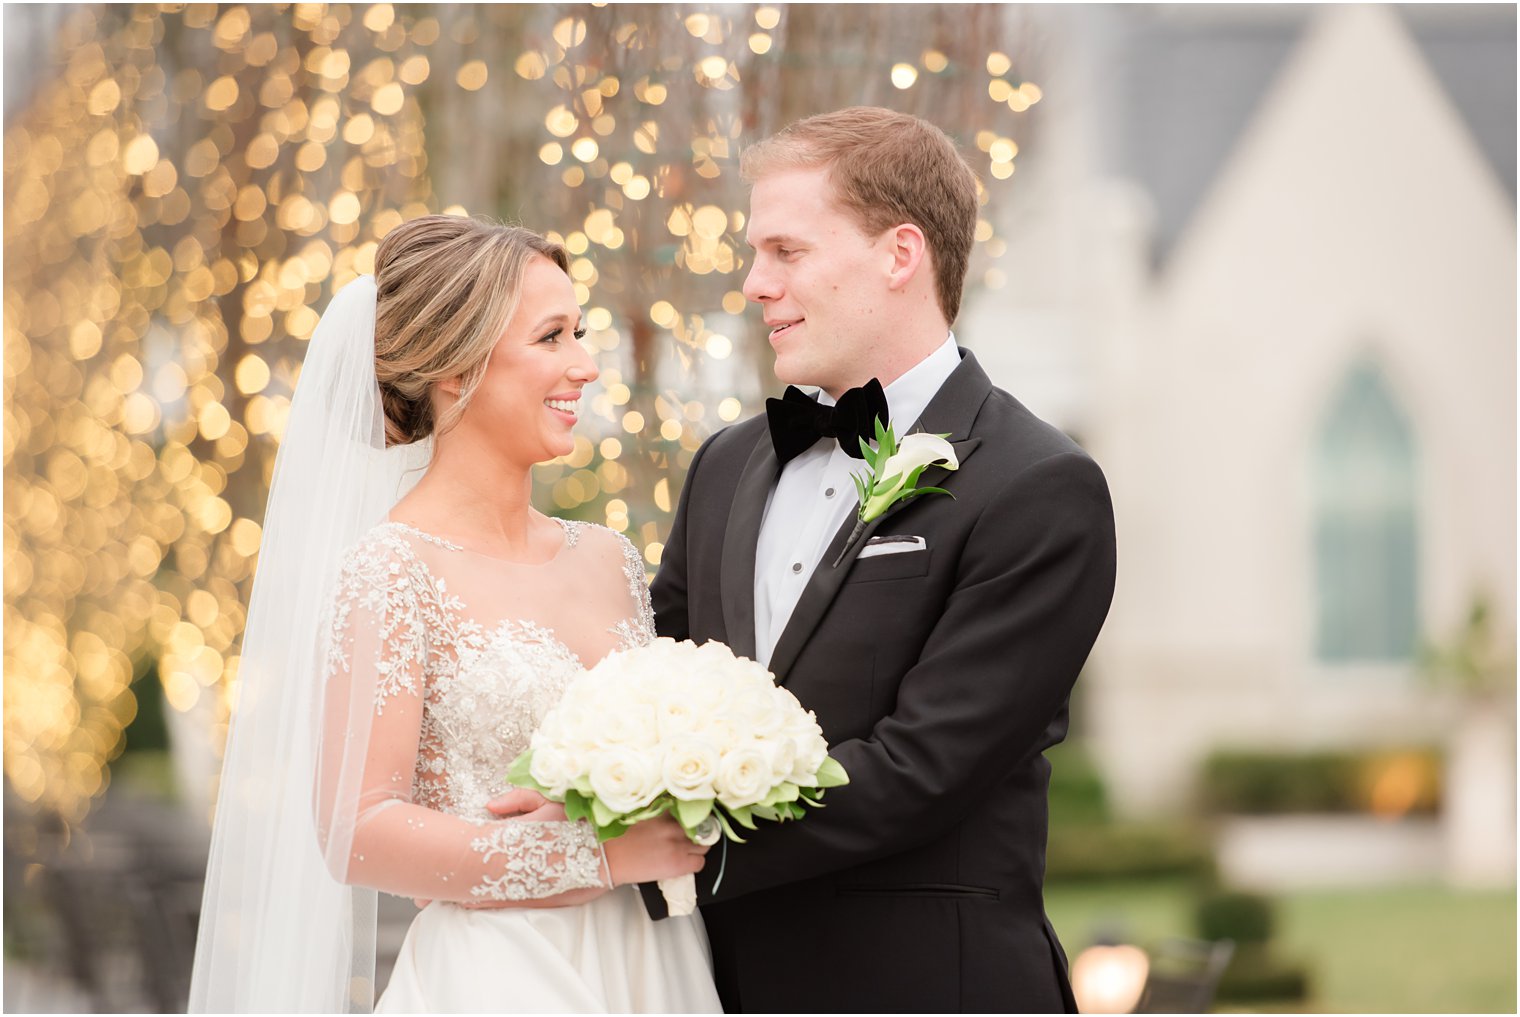 Candid photo of bride and groom at Park Chateau Estate and Gardens | Photos by Idalia Photography